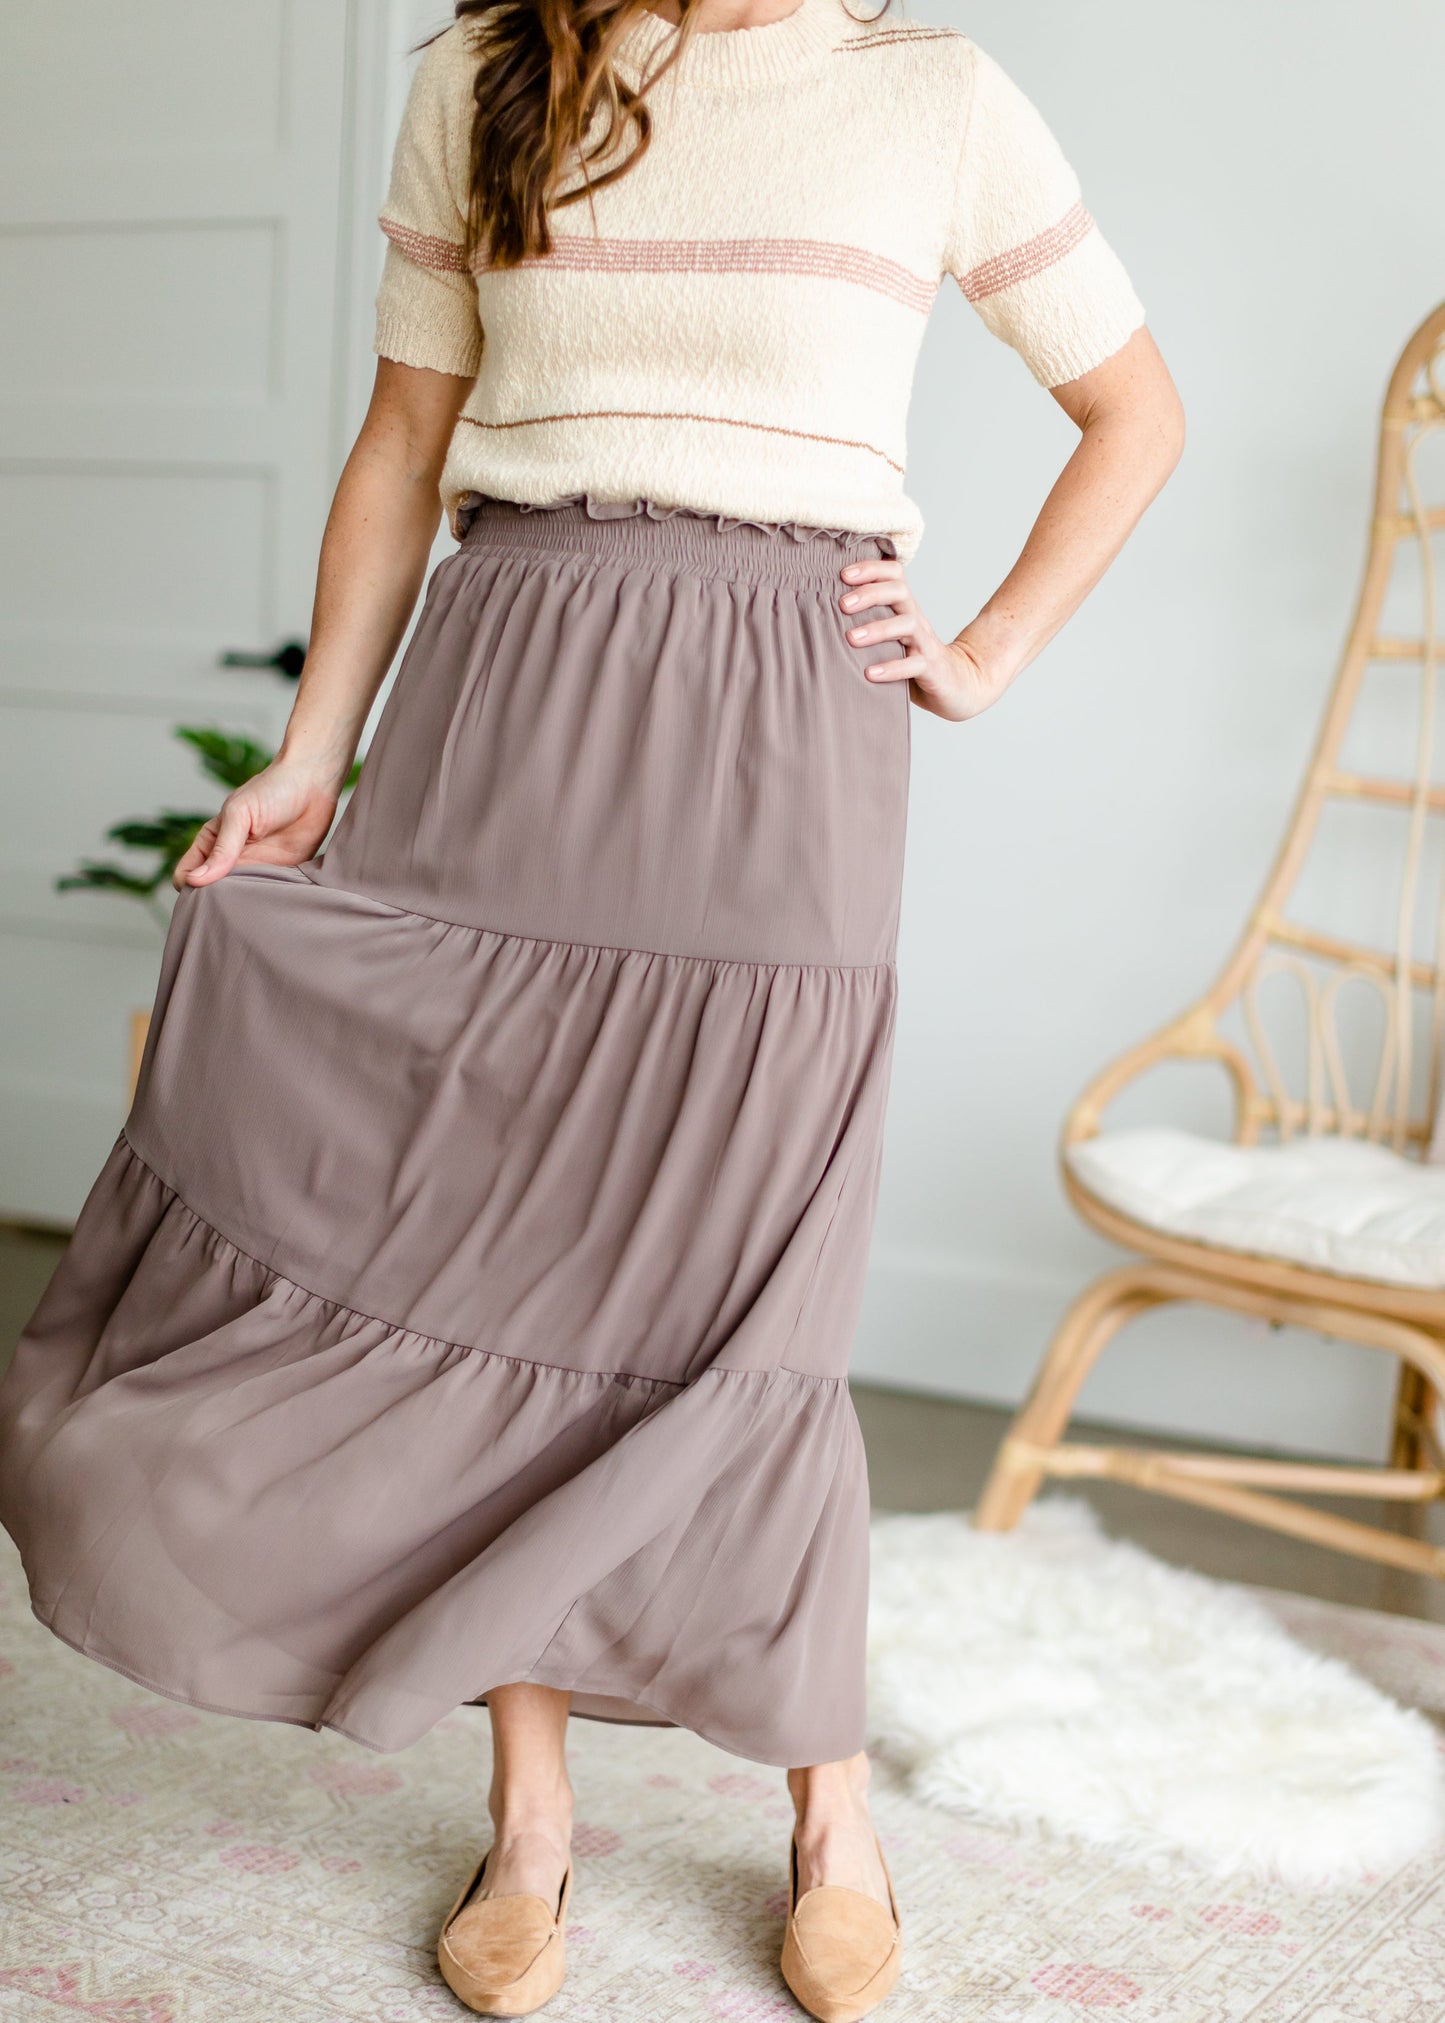 Taupe Tiered Maxi Skirt - FINAL SALE Skirts